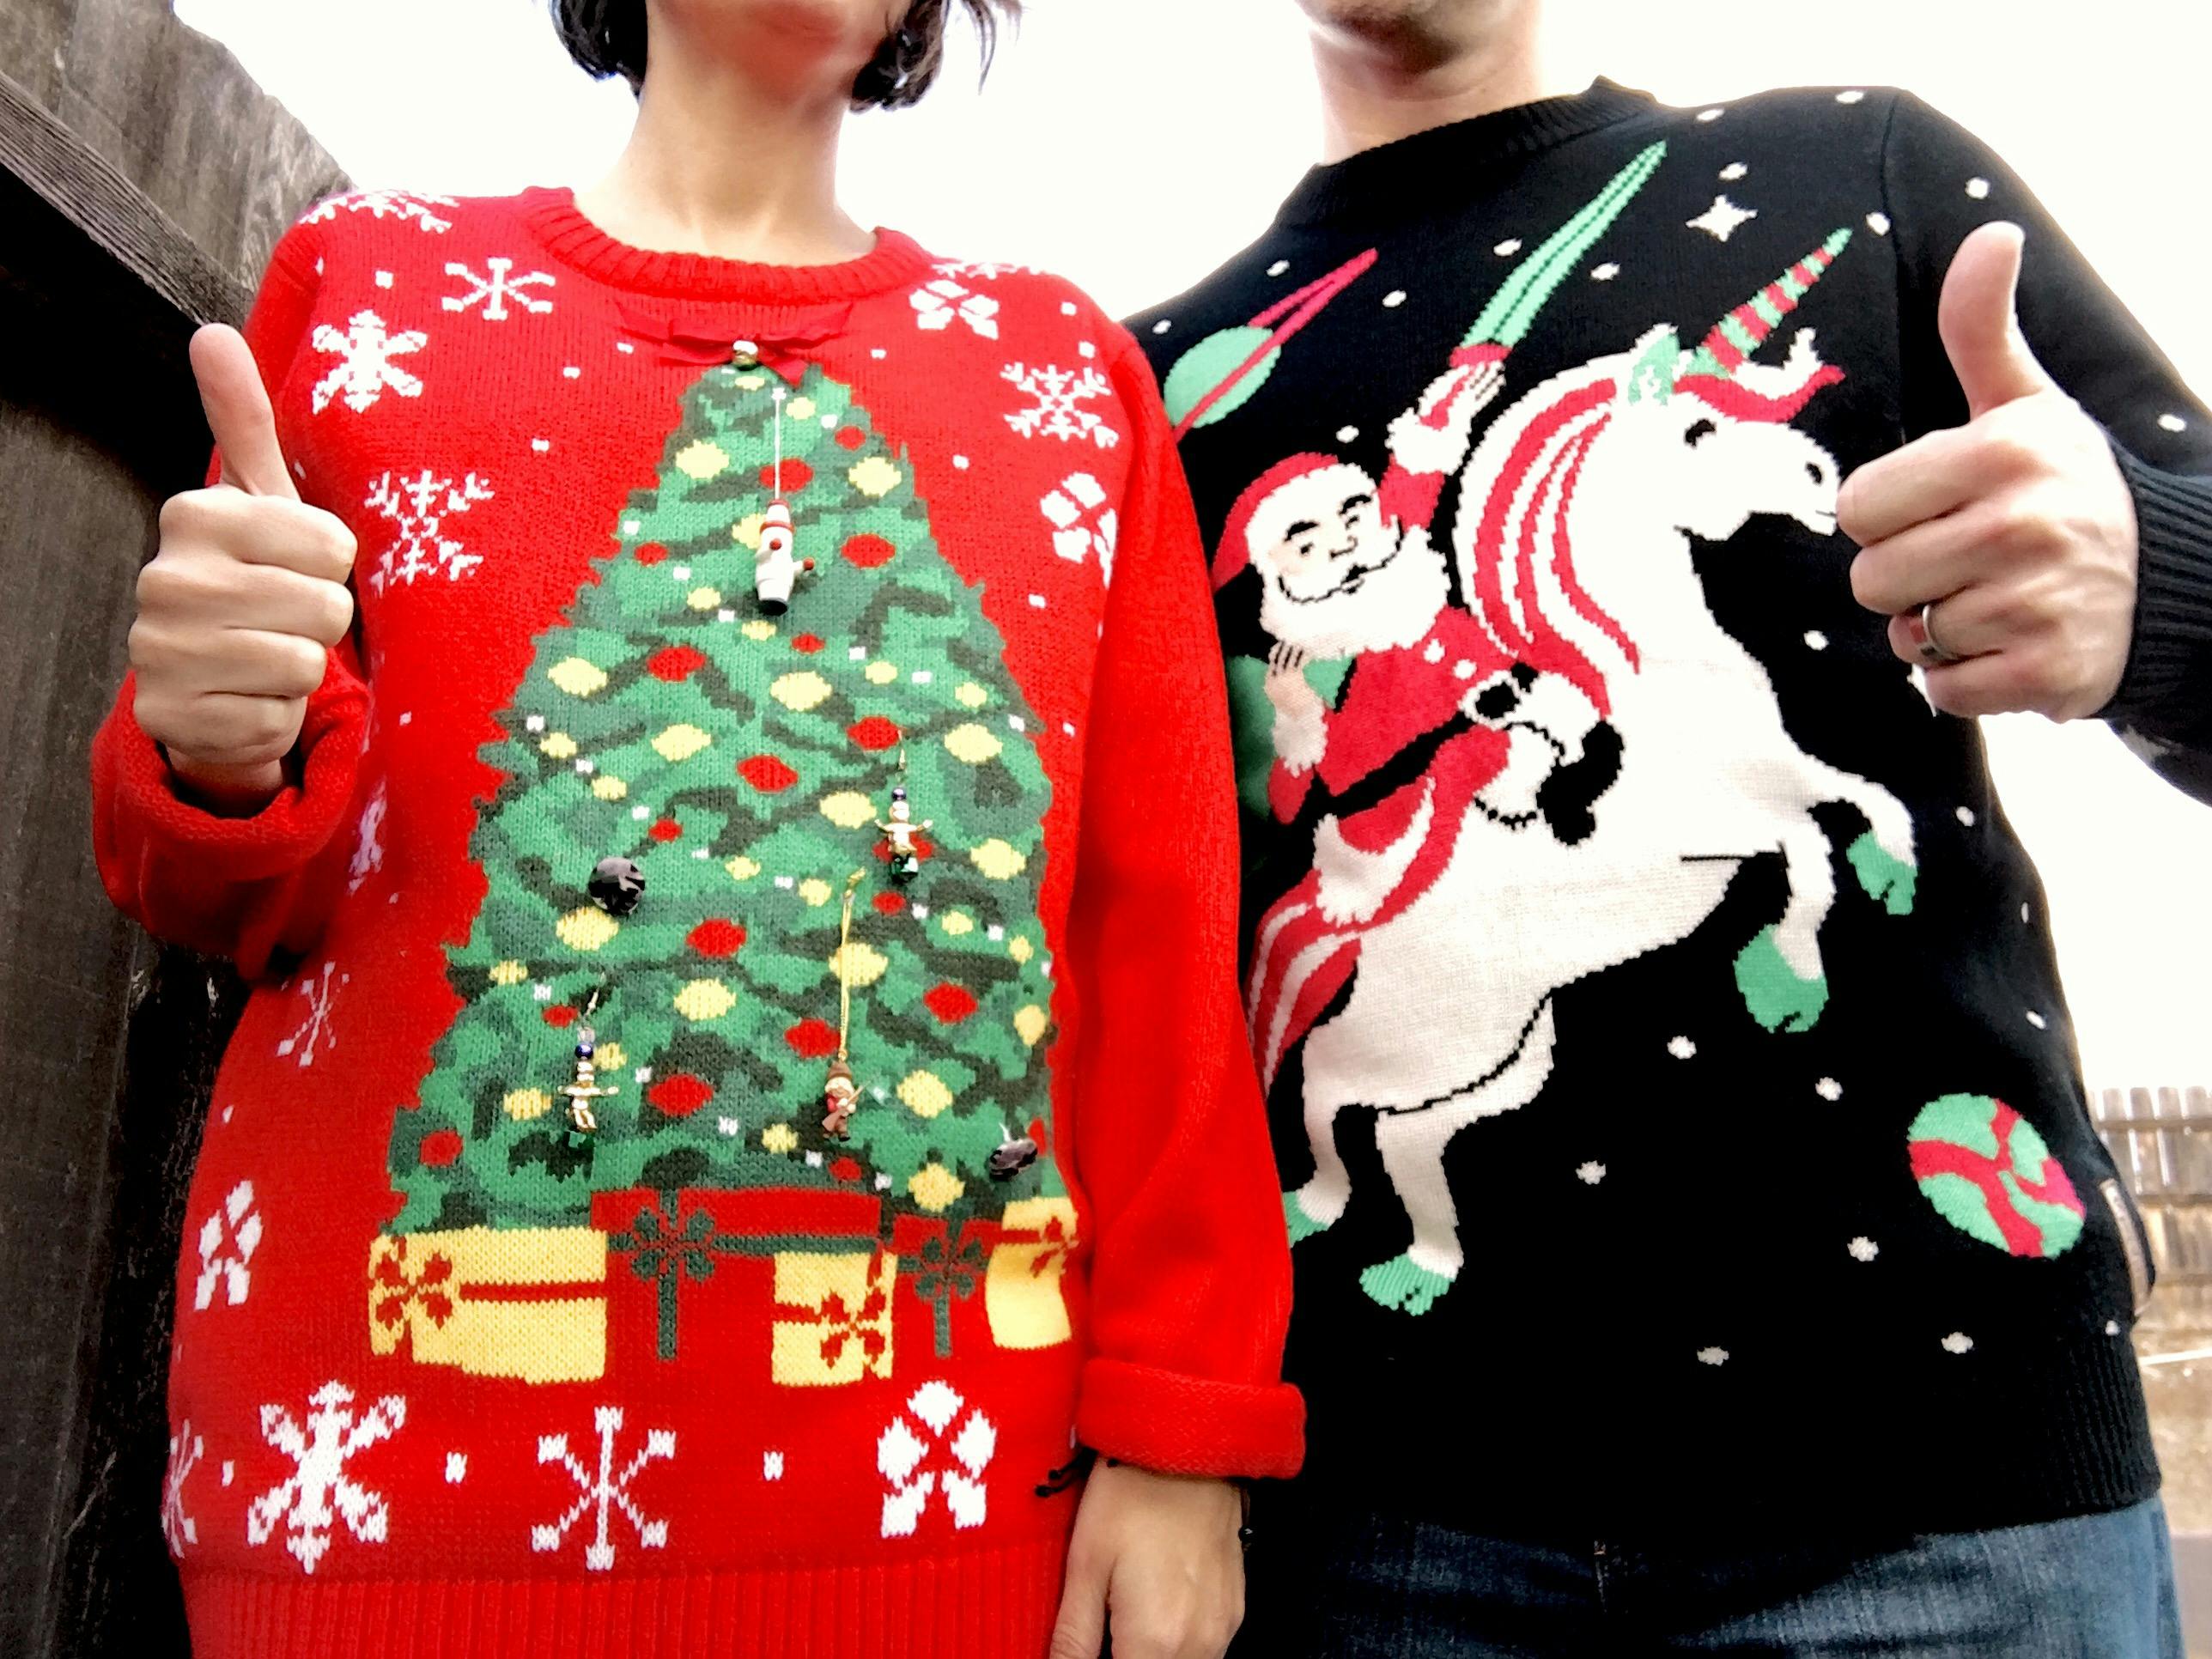 Rejoice! It's National Ugly Sweater Day!
